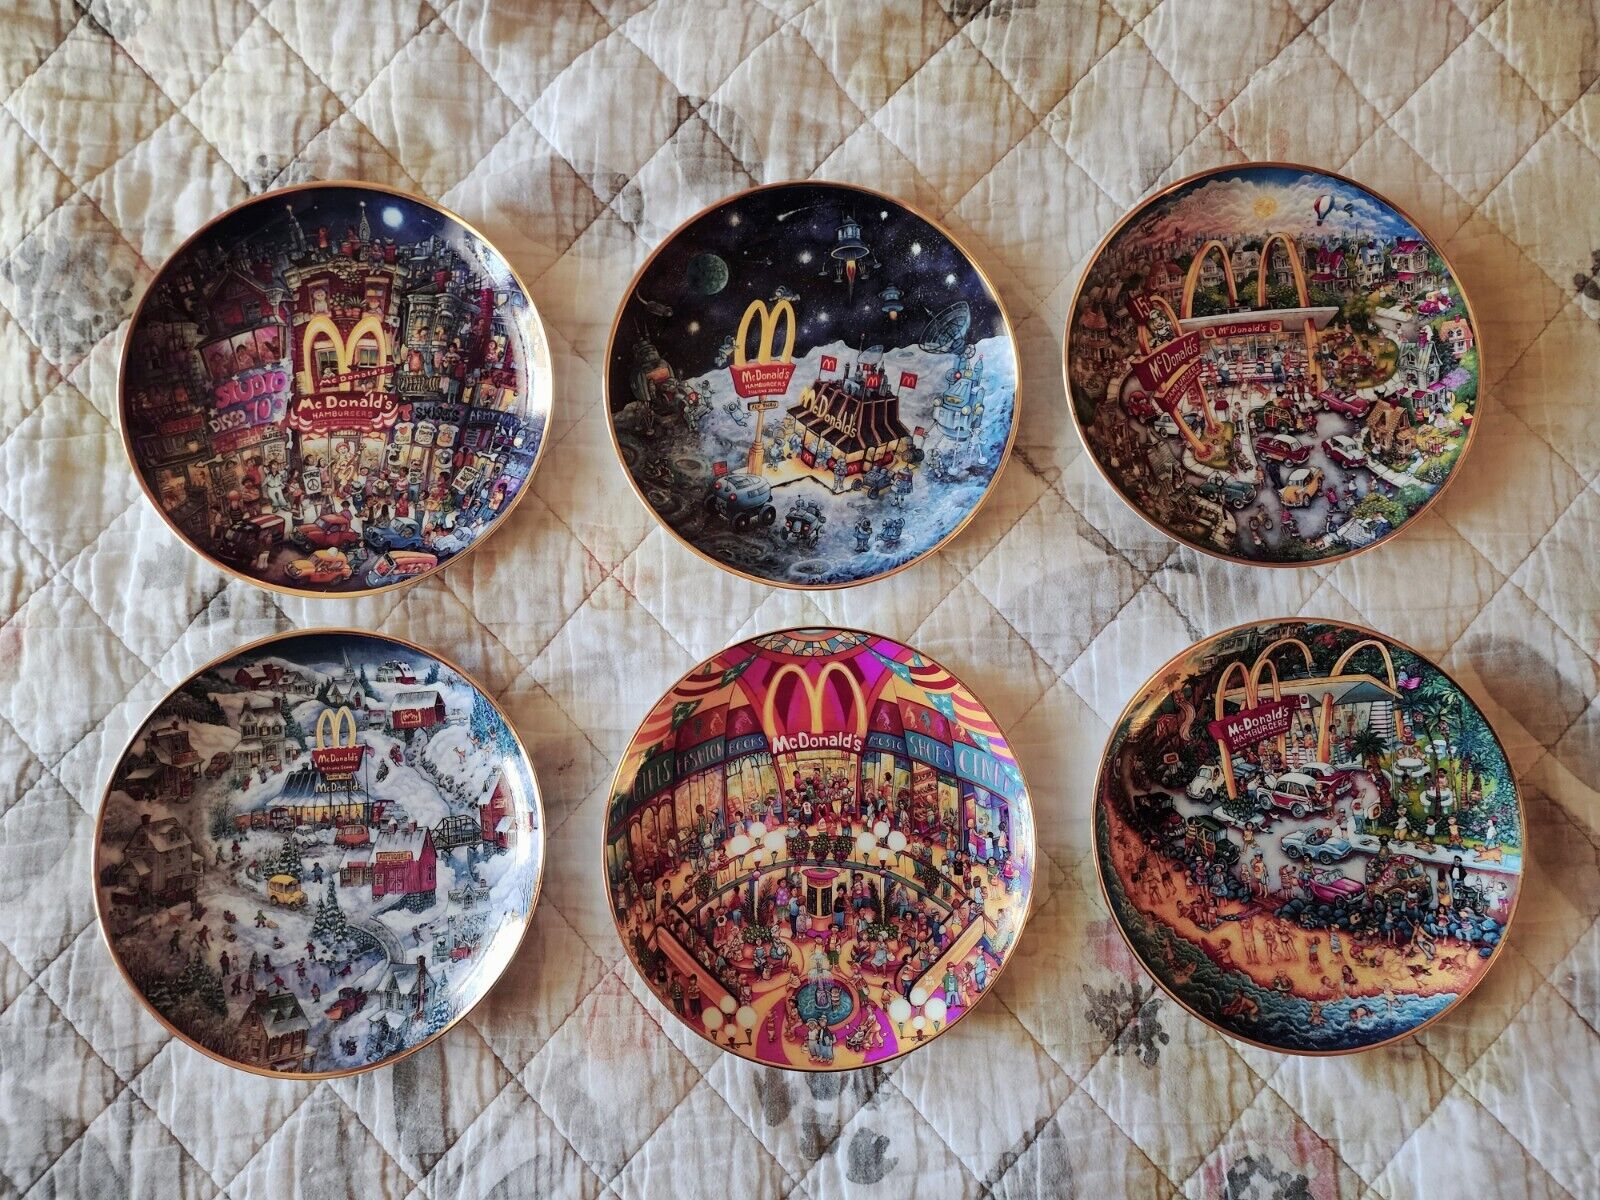 Full Set of 6 Franklin Mint McDONALD\'S COLLECTOR PLATES by Bill Bell - 1994